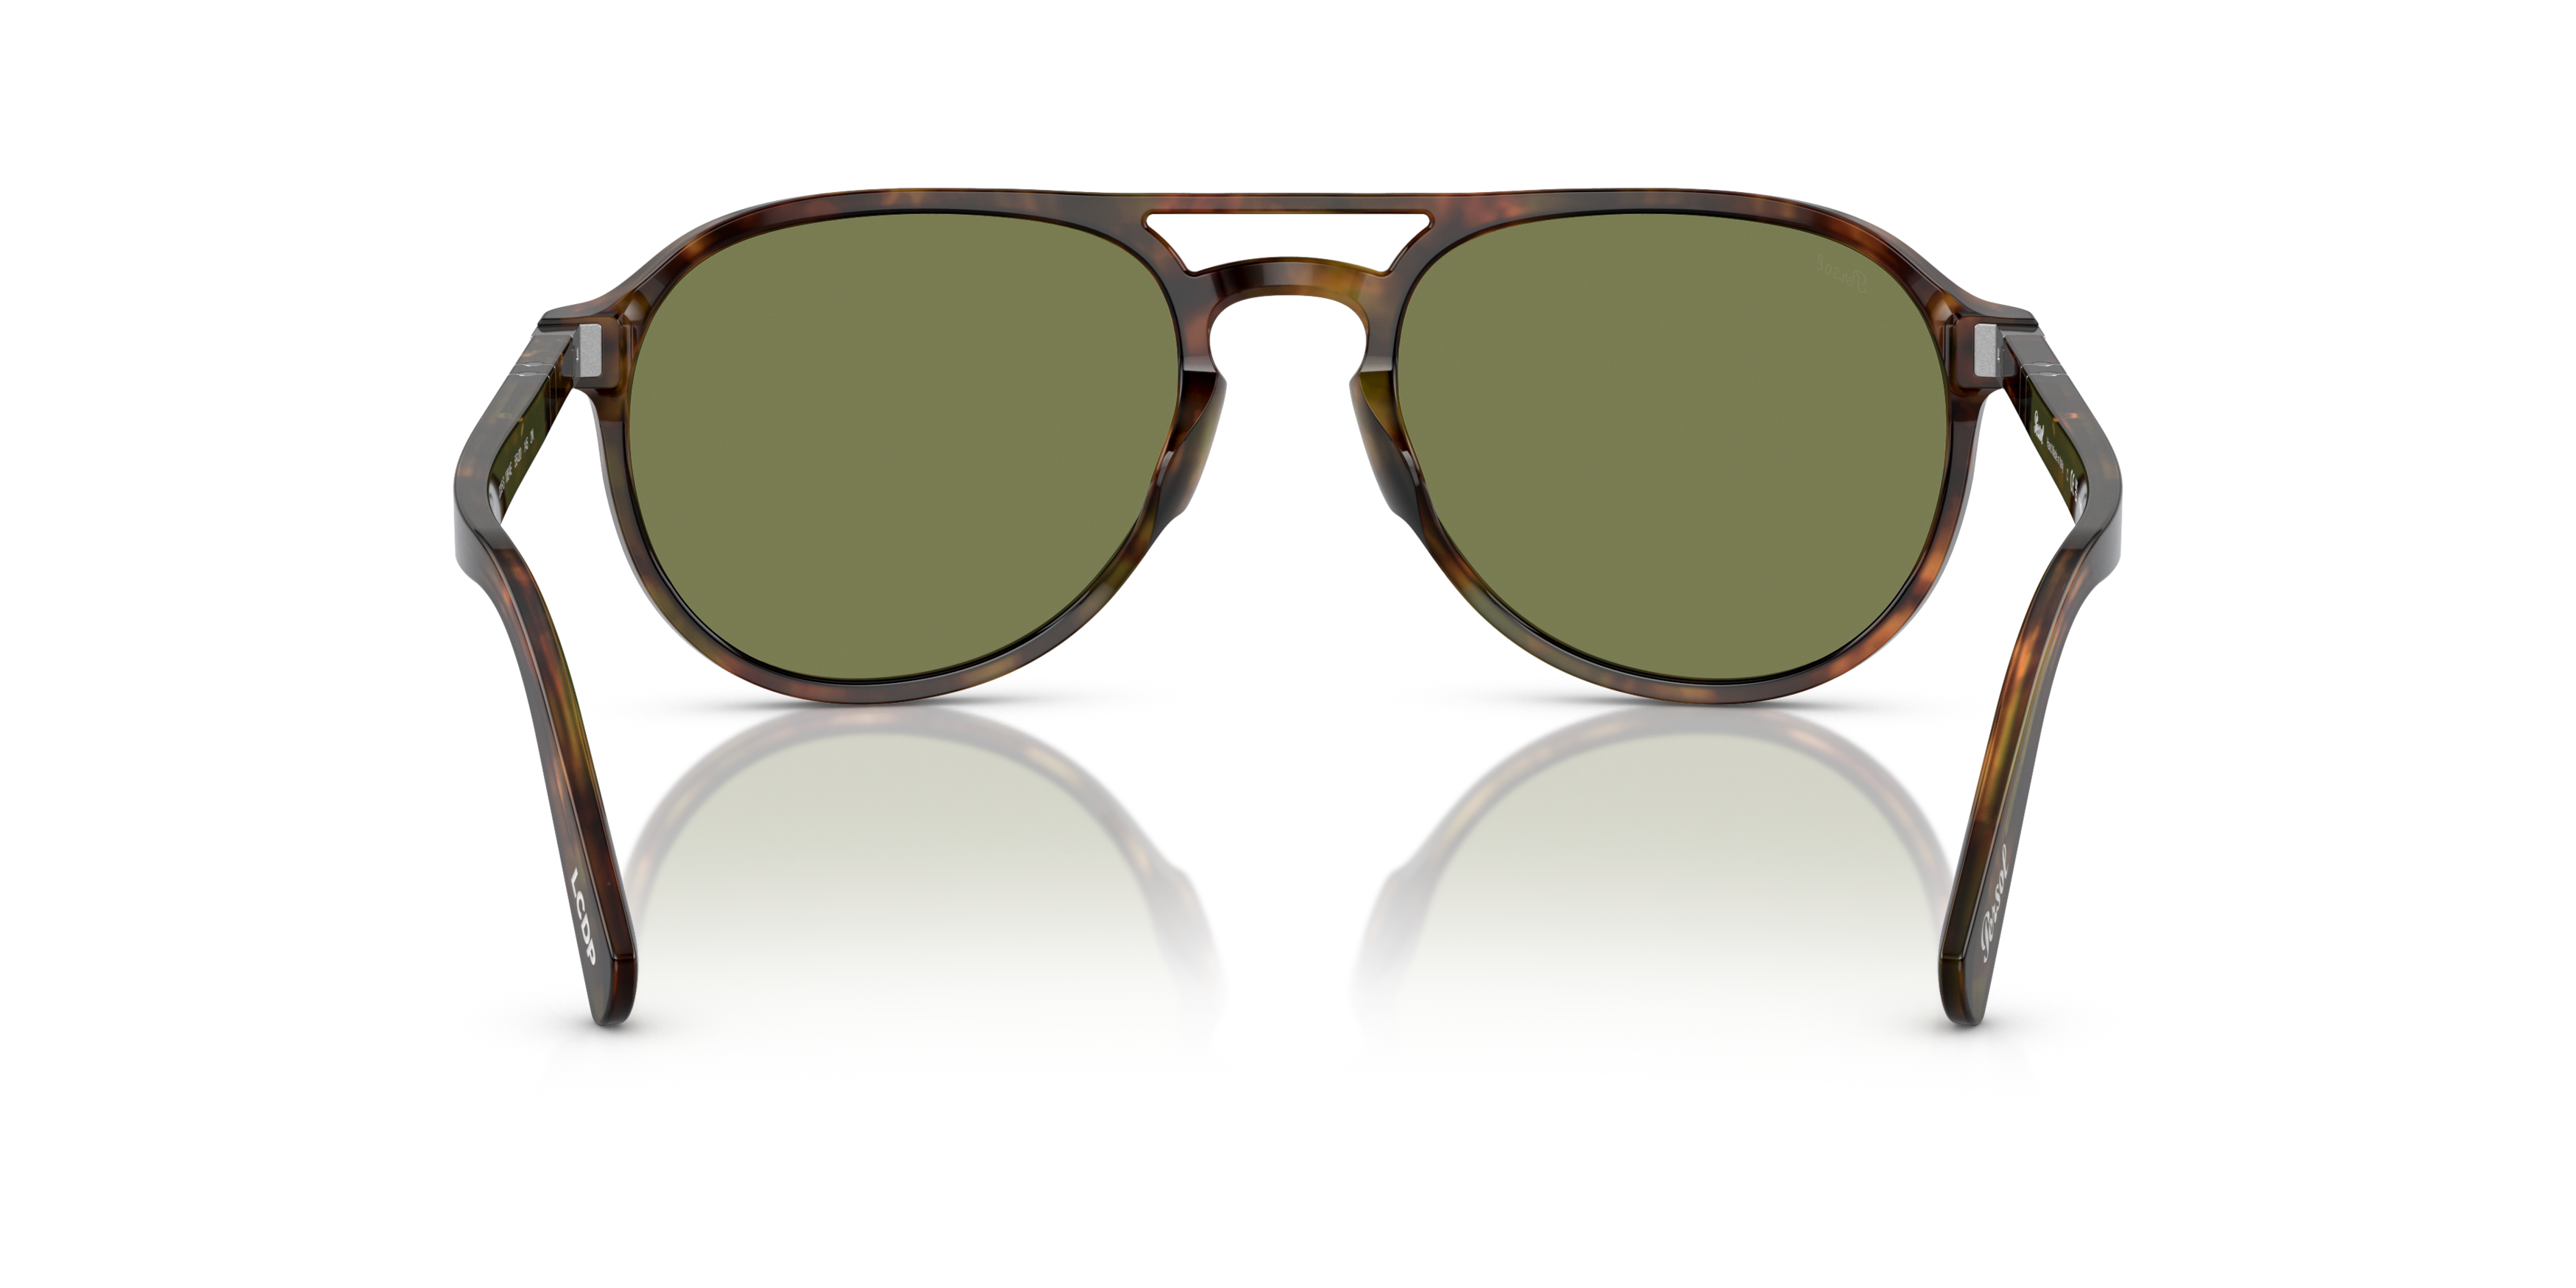 [products.image.detail02] Persol 0PO3235S